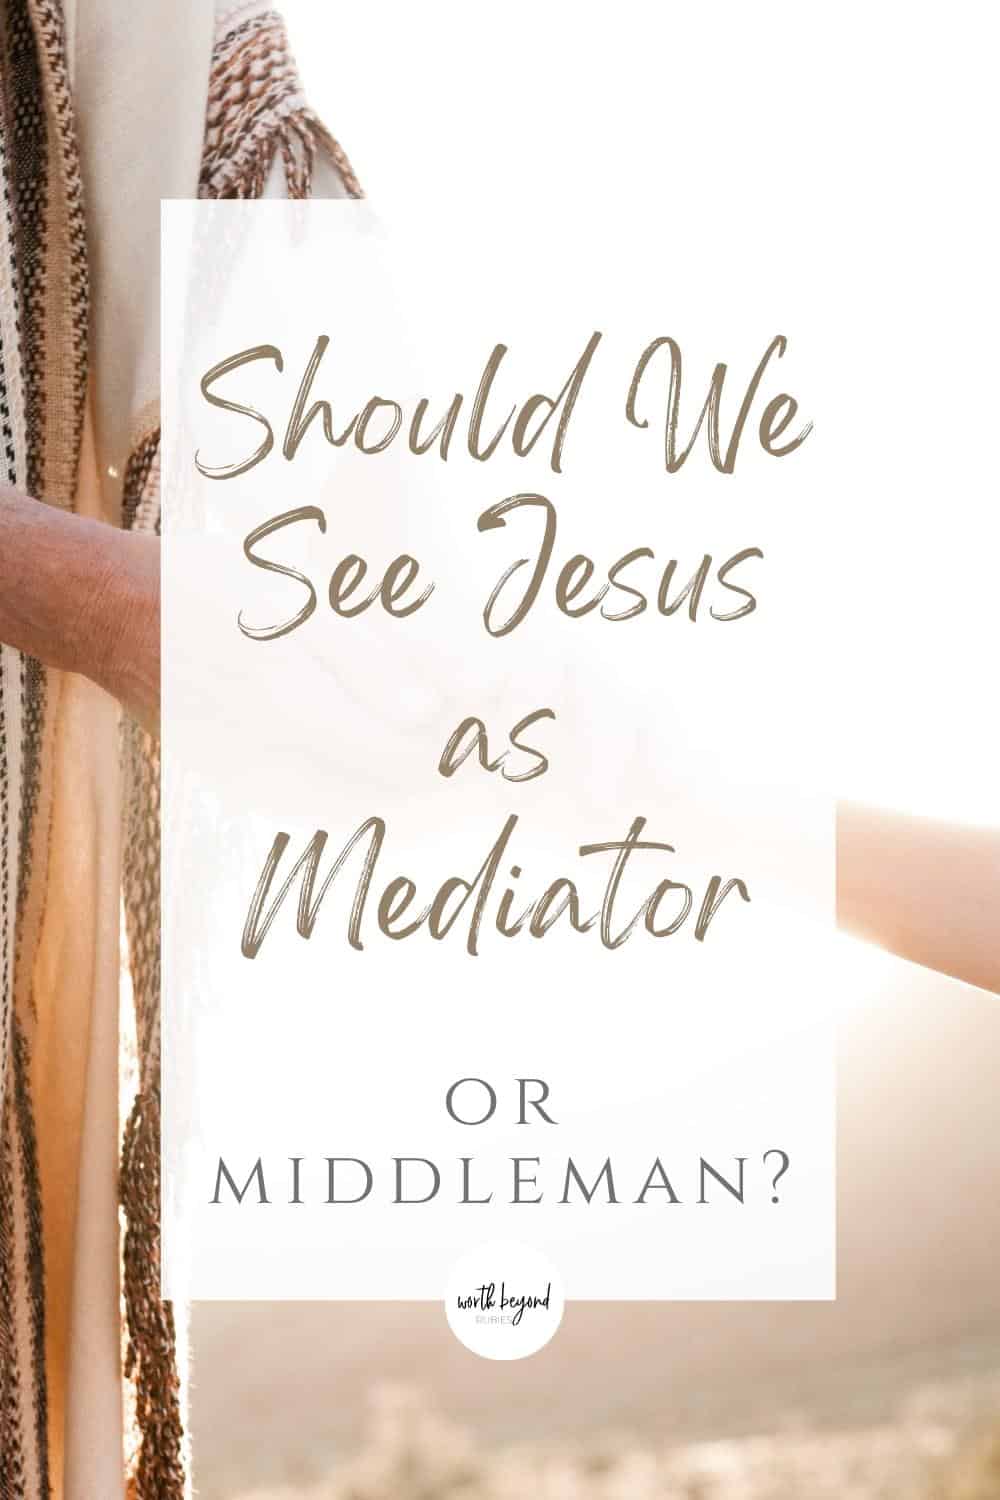 An image of a man's hands reaching out for a woman's hand as an image of Jesus reaching out and a text overlay that says Should We See Jesus as Mediator or Middleman?